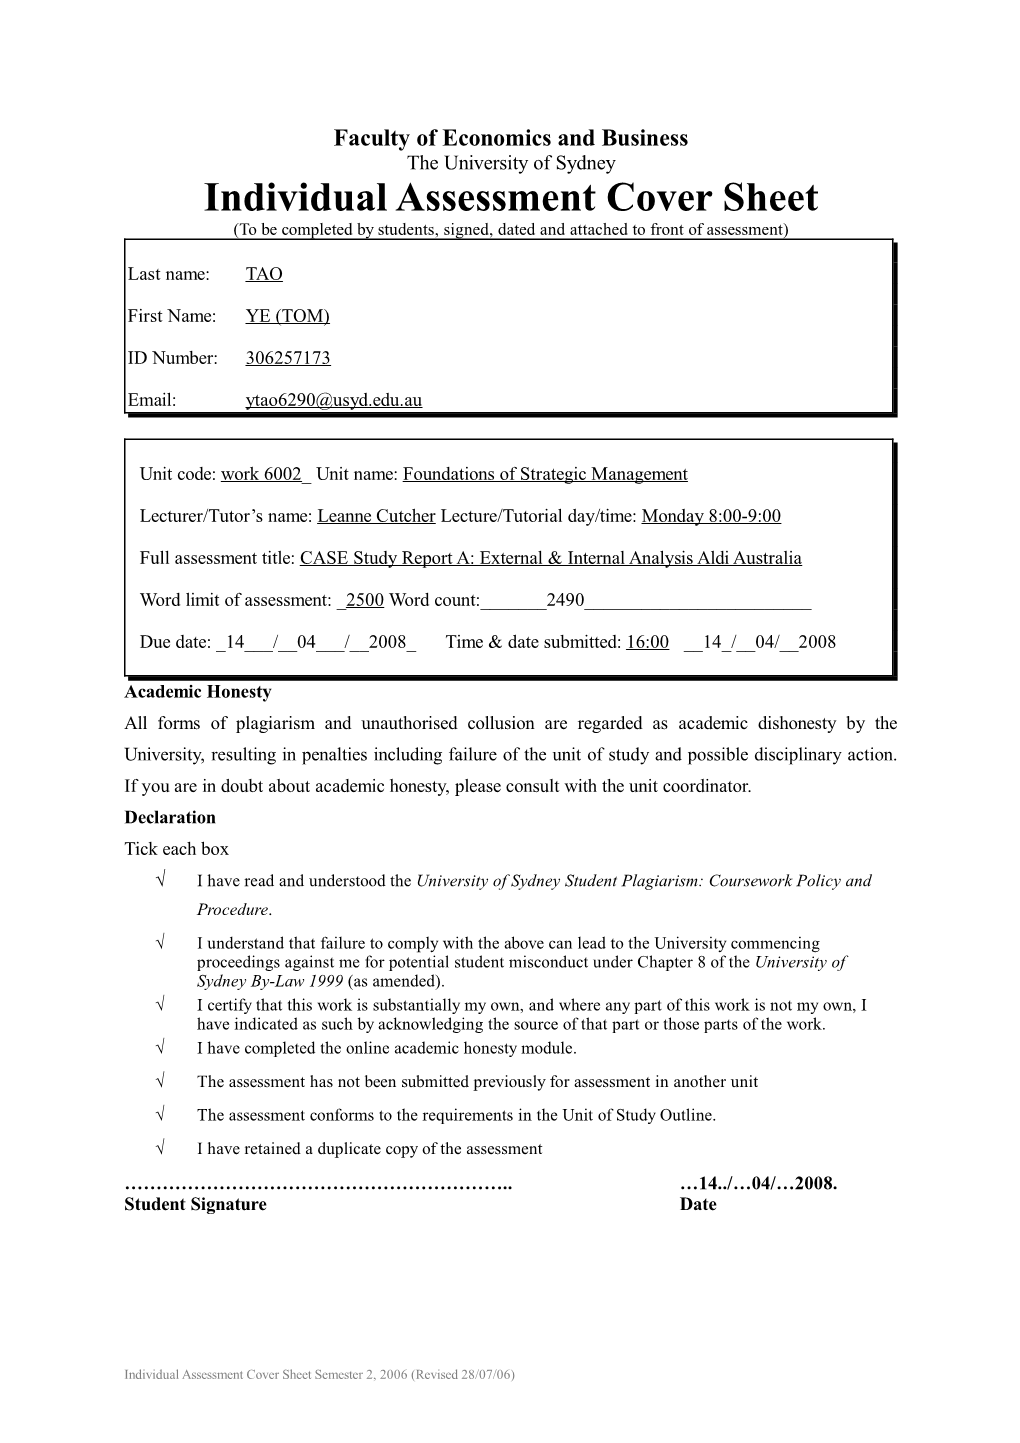 The University of Sydney Individual Assessment Cover Sheet (To Be Completed by Students, Signed, Dated and Attached to Front of Assessment)